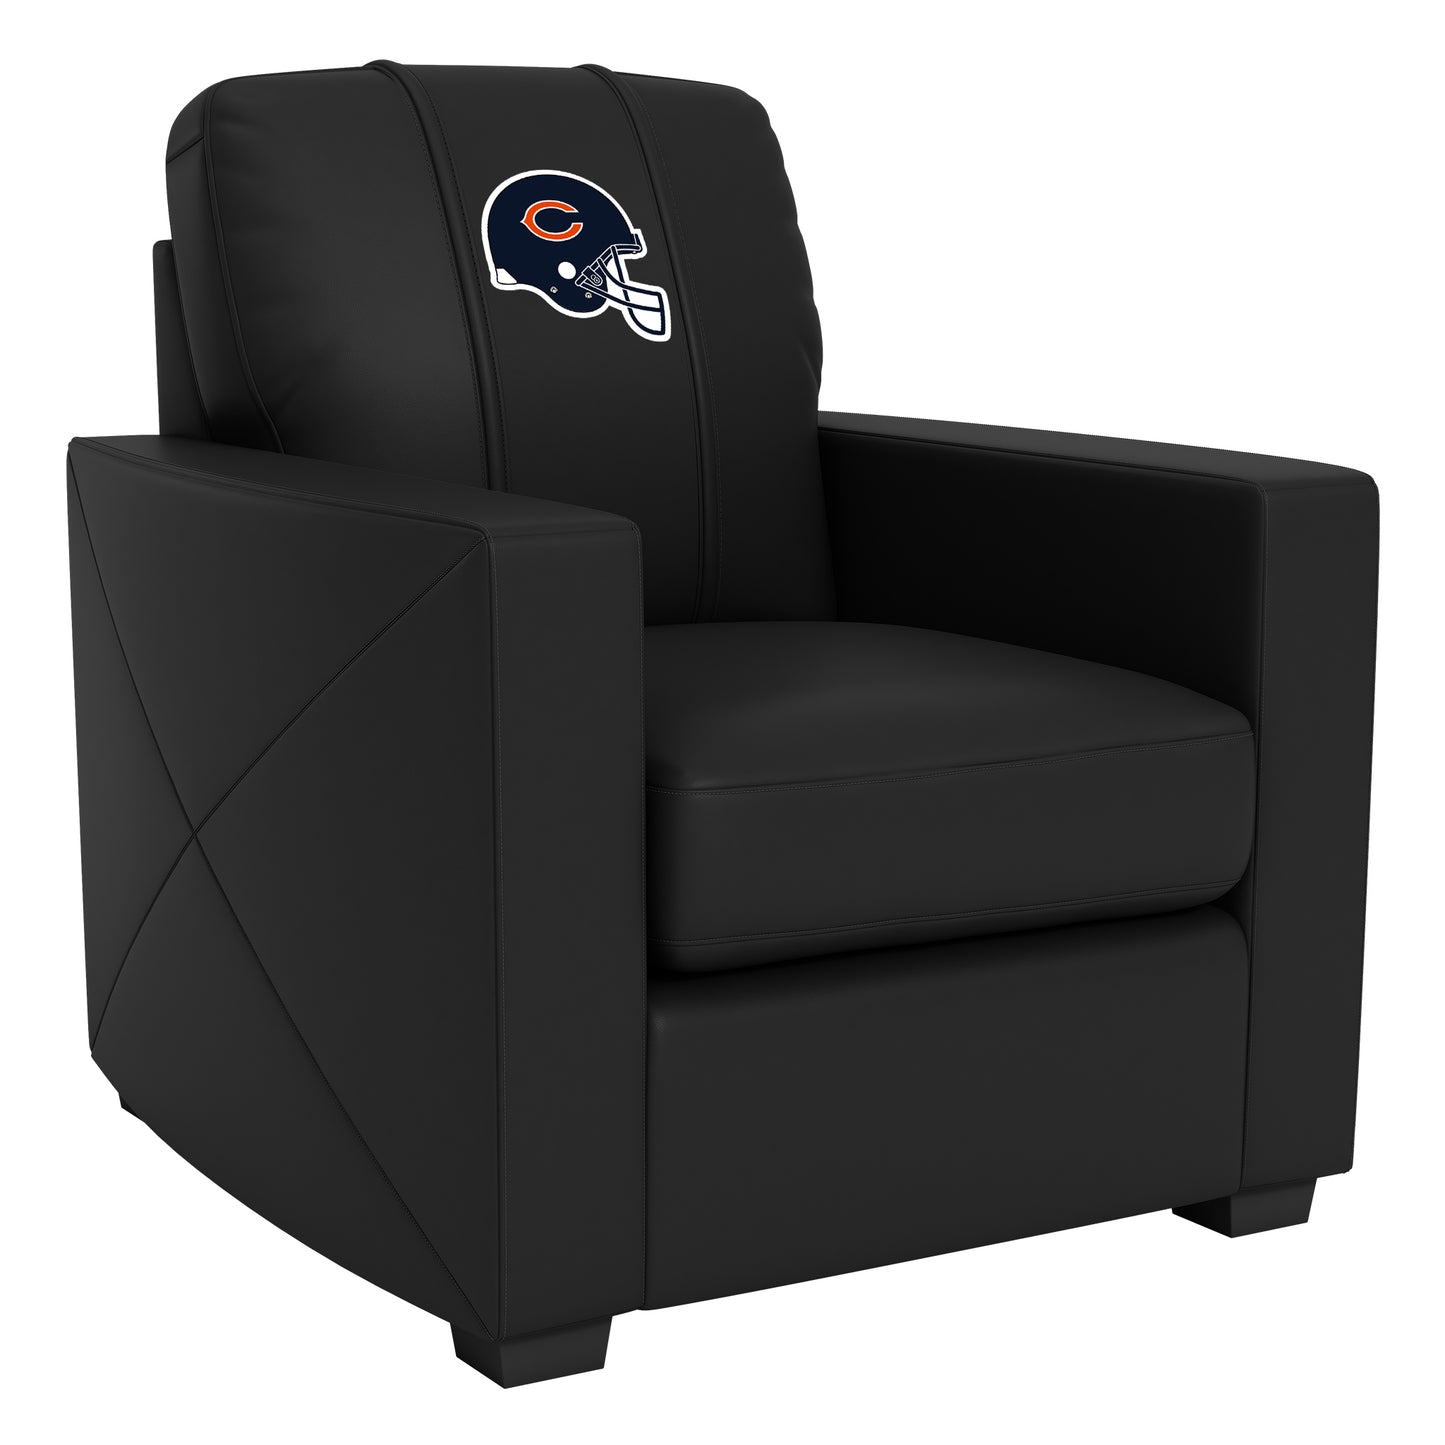 Silver Club Chair with  Chicago Bears Helmet Logo